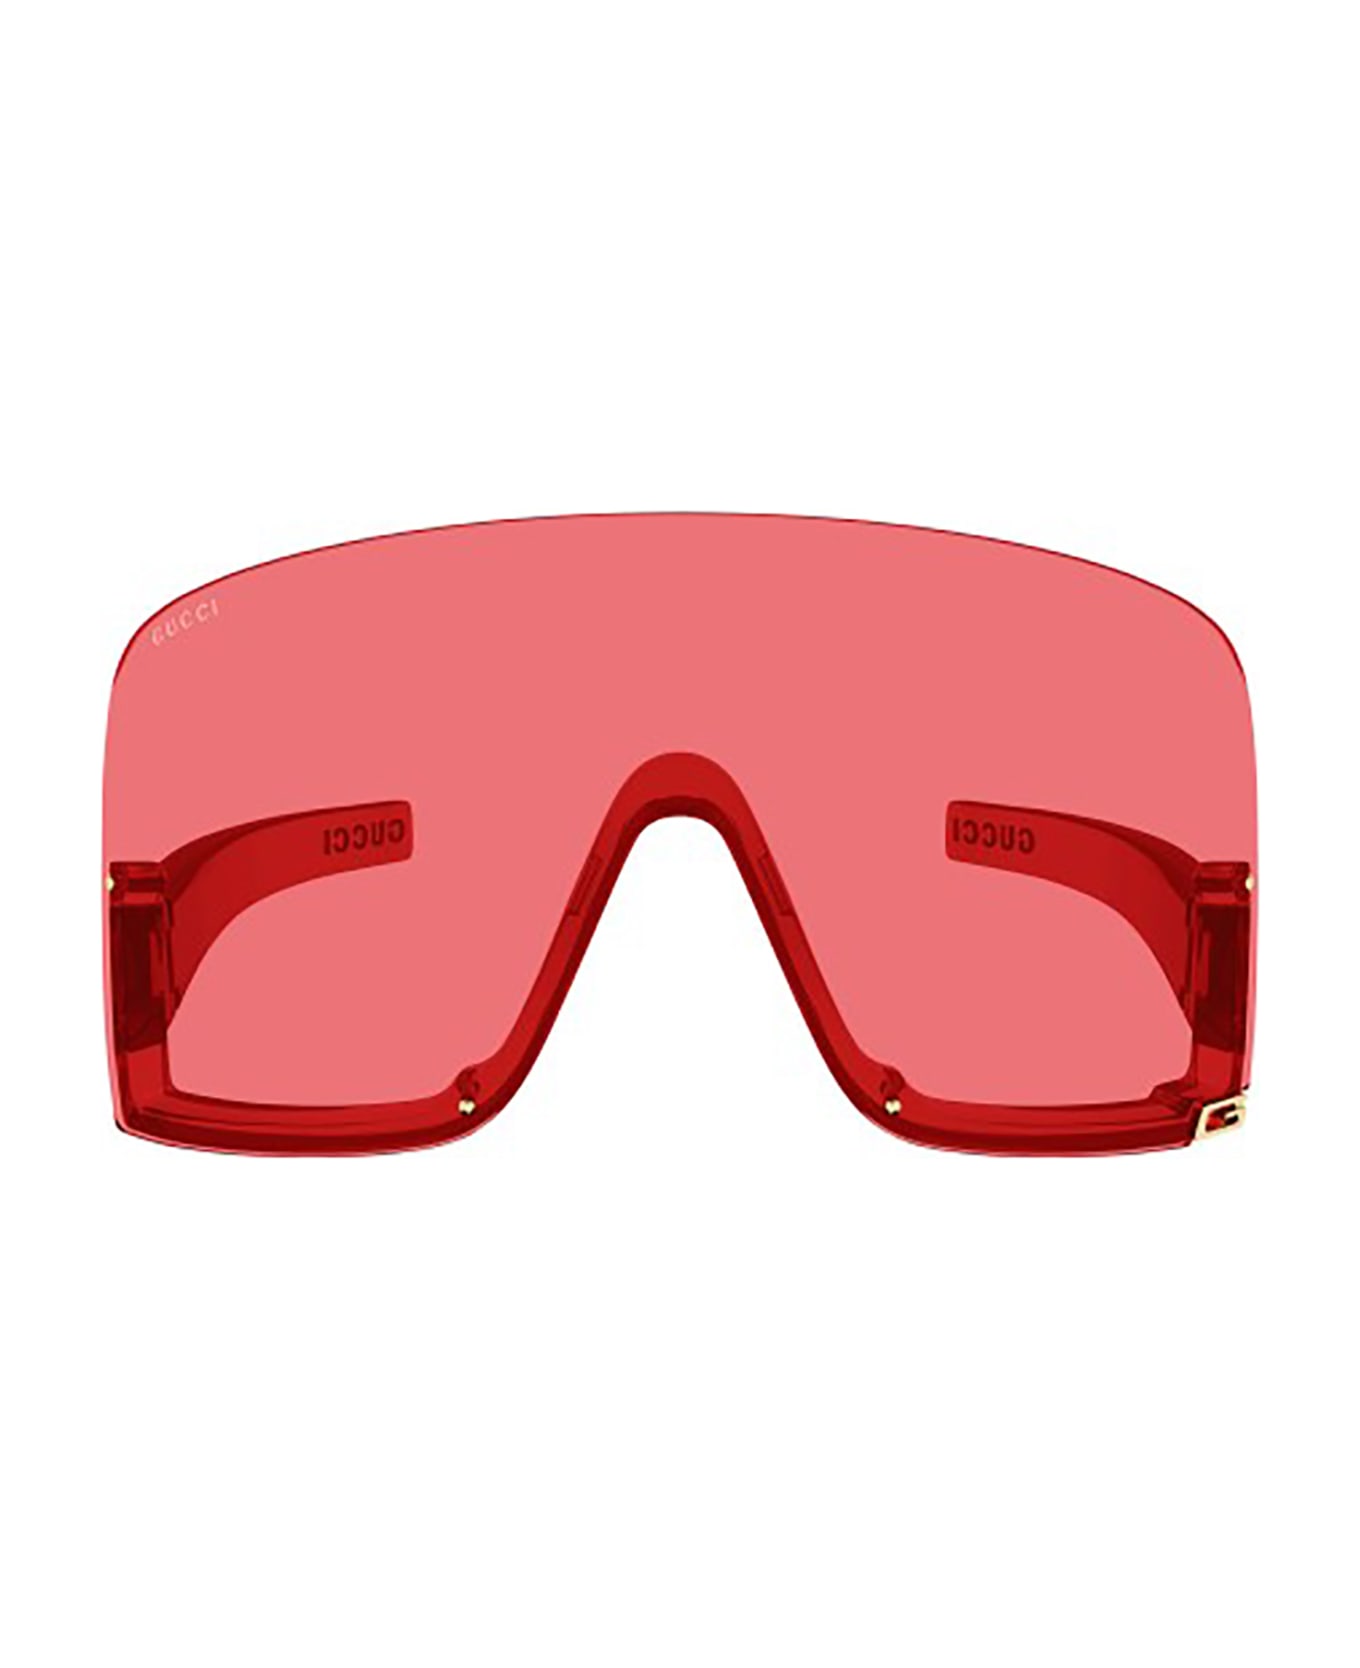 Gucci Eyewear GG1631S Sunglasses - Red Red Red サングラス